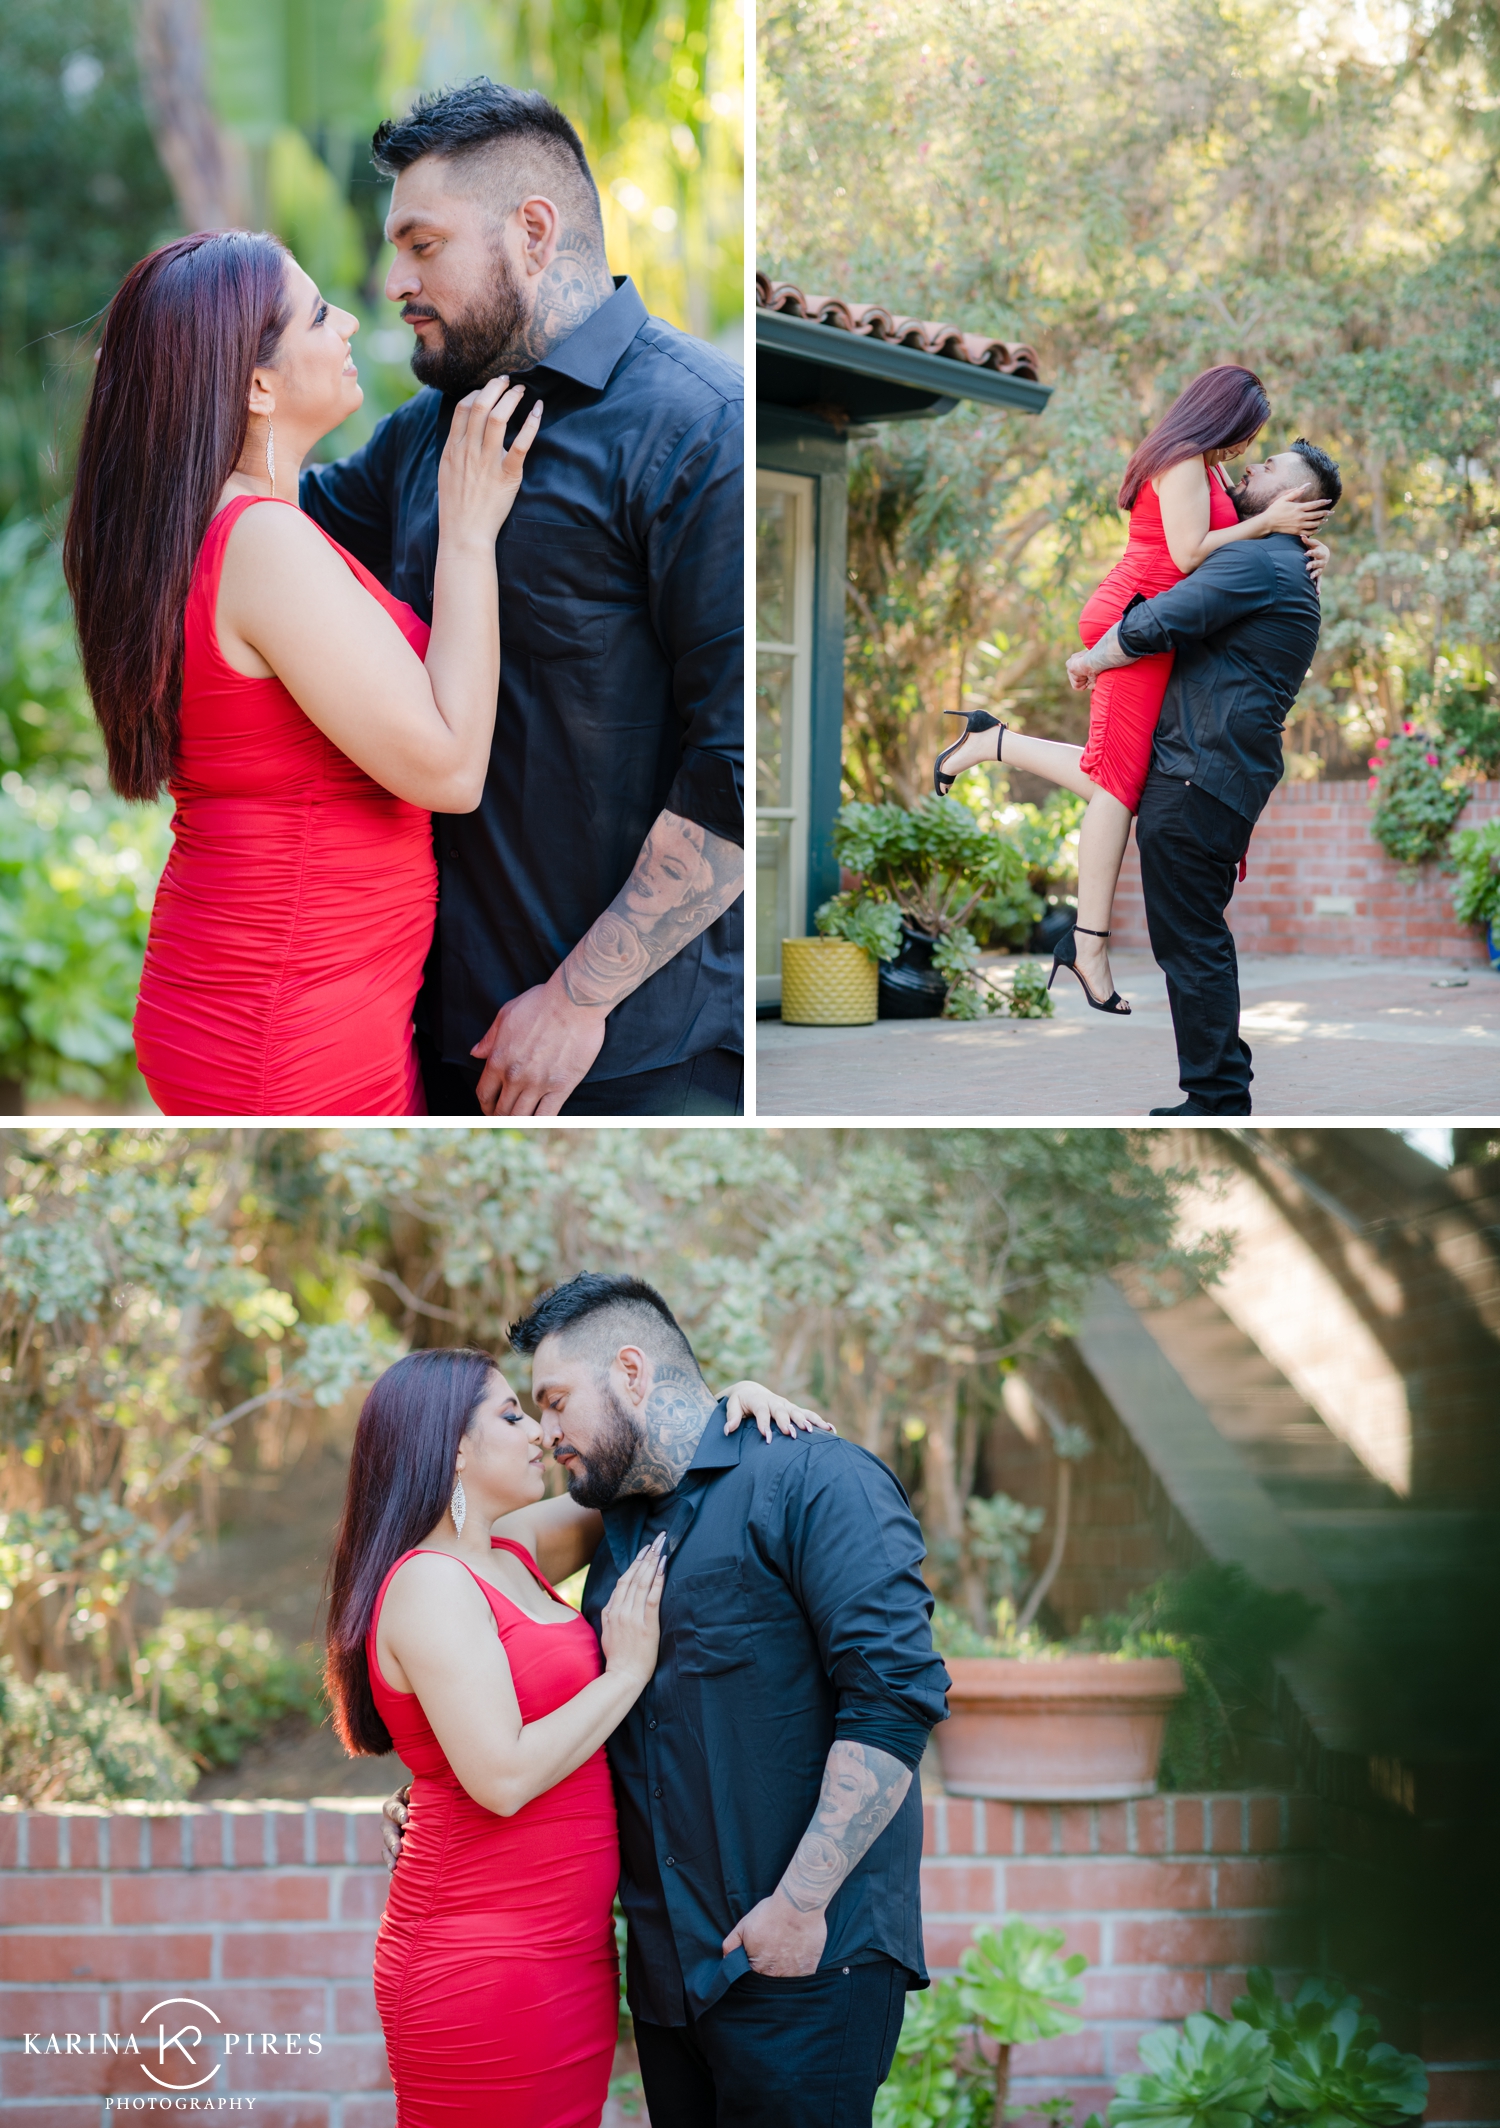 Valentine's couples shoot in downtown Los Angeles